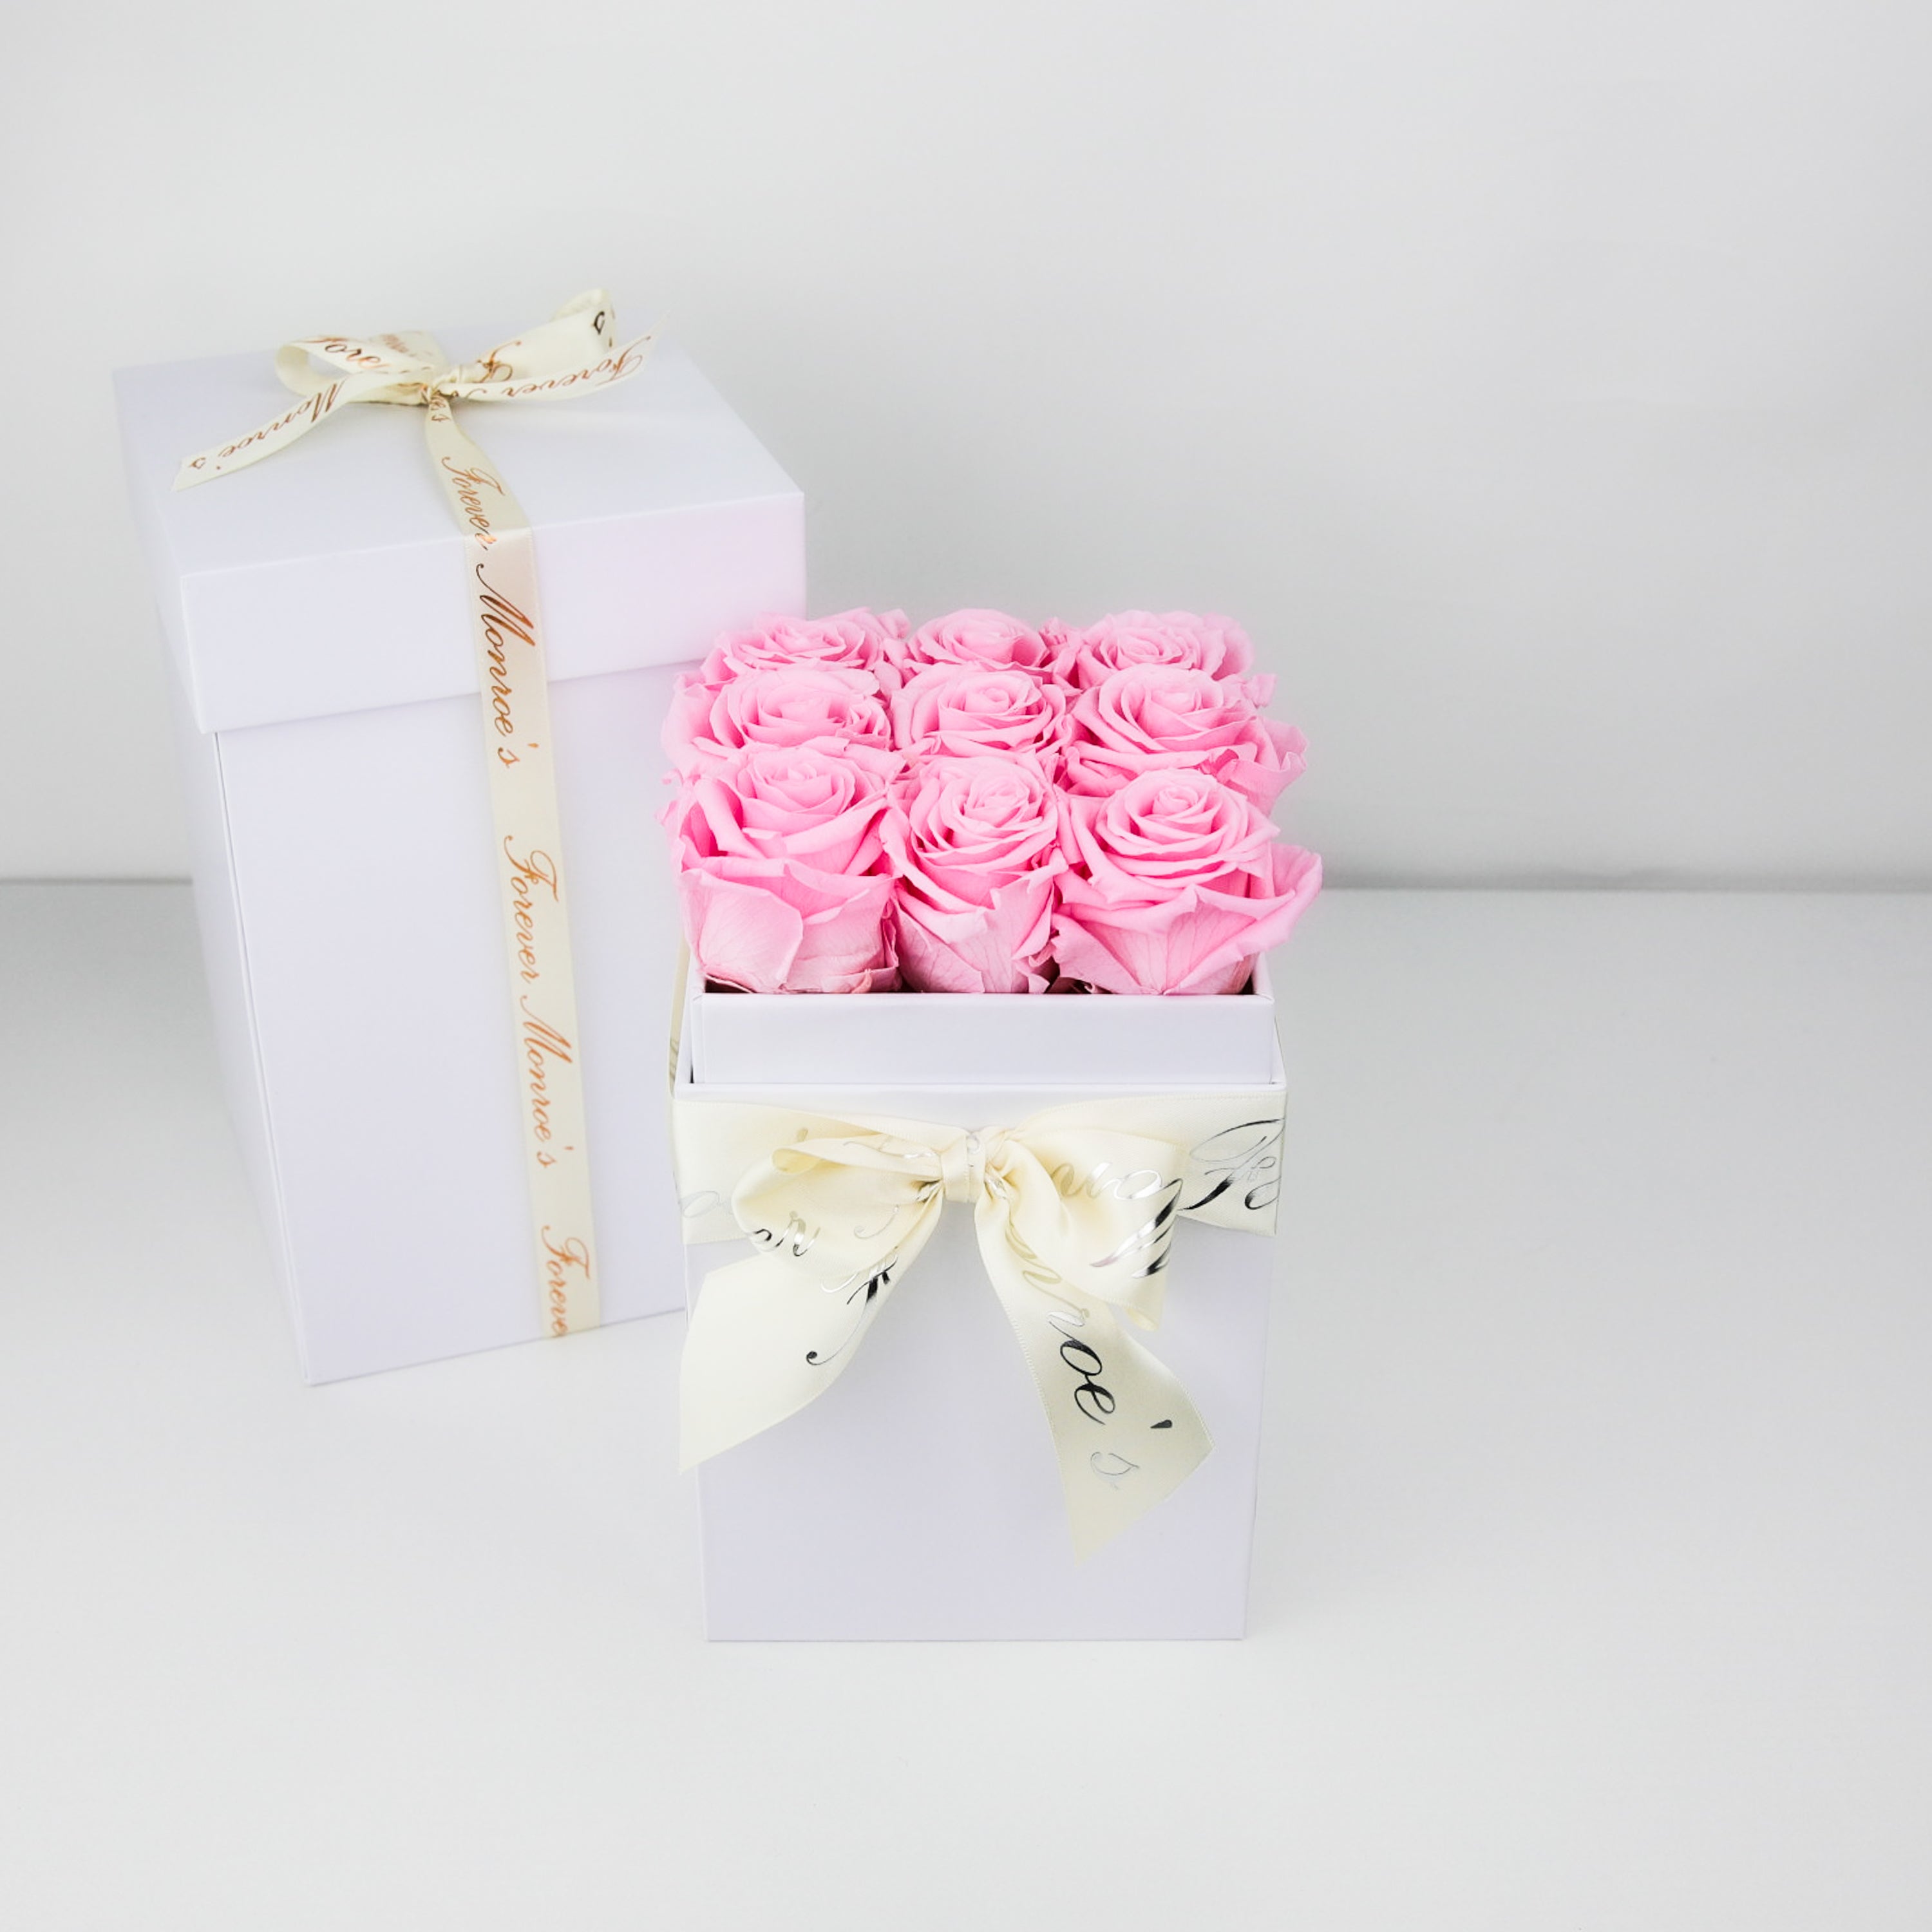 Butterfly Surprise Rose Box Bouquet - 9 Roses (White Box)